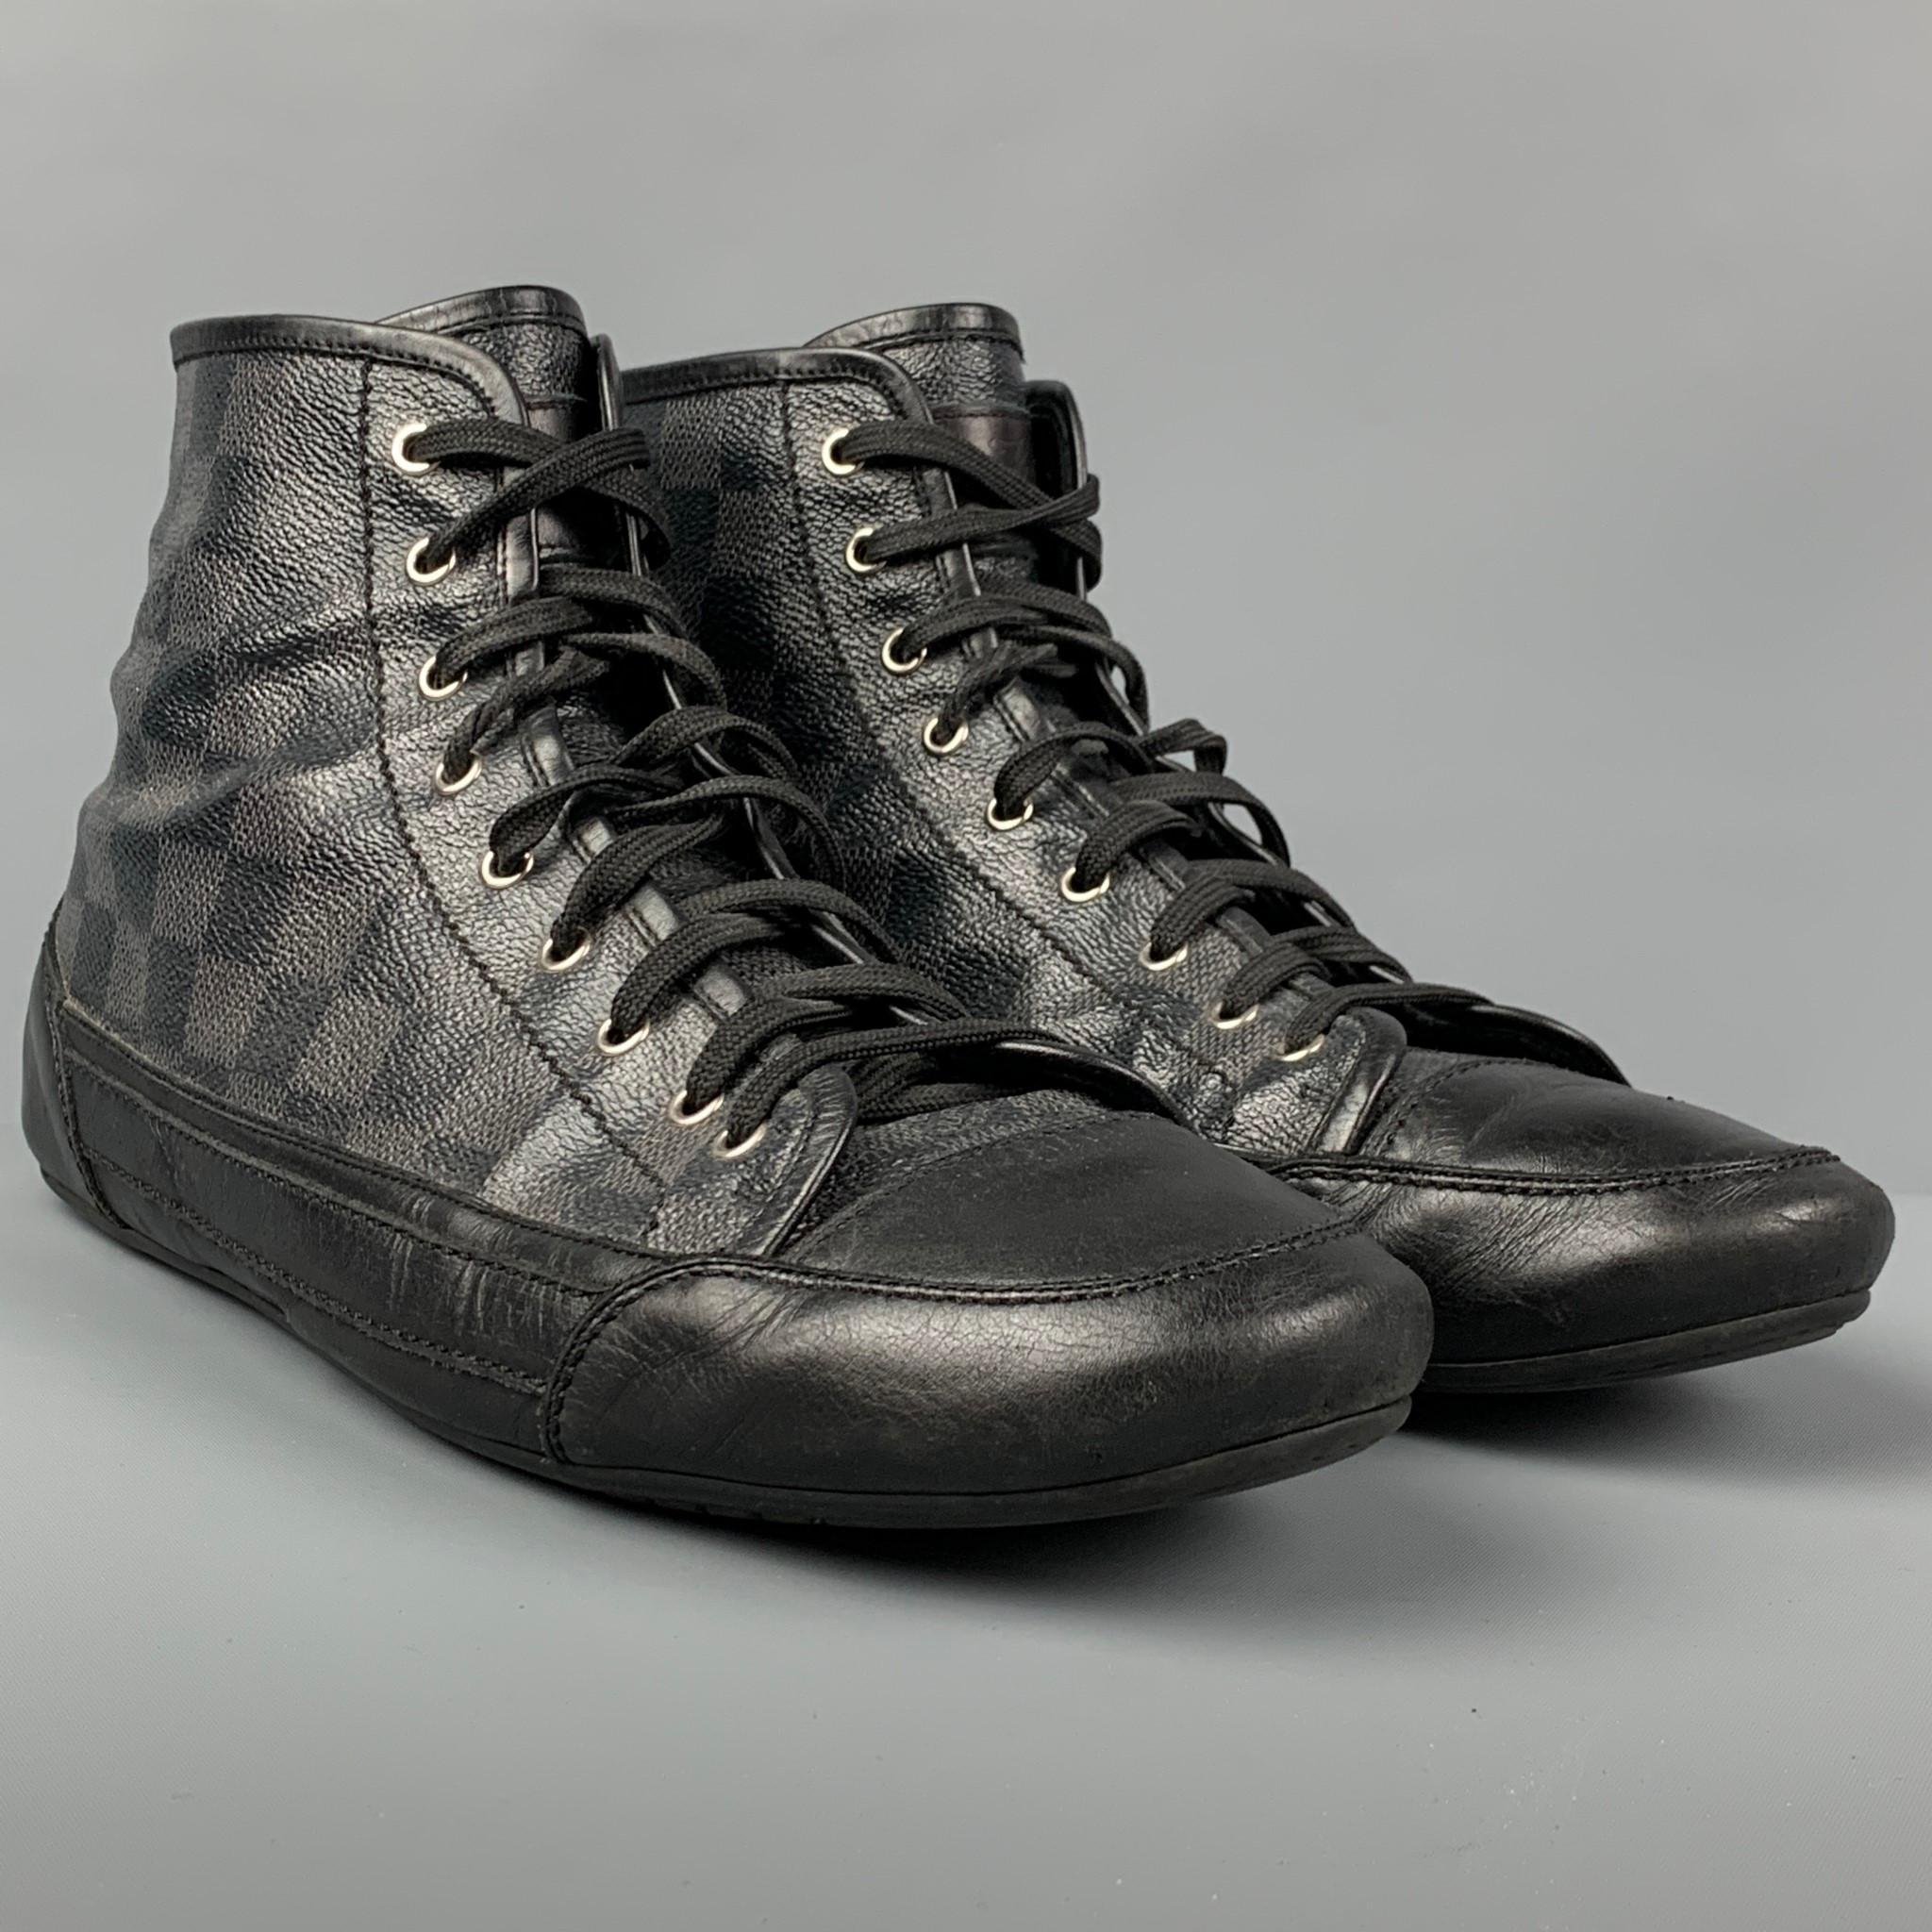 LOUIS VUITTON shoes comes in a black & grey damier canvas featuring a high top style and a lace up closure. Made in Italy. 

Good Pre-Owned Condition. Minor wear.
Marked: BA0048 10

Outsole: 12 in. x 3.5 in. 